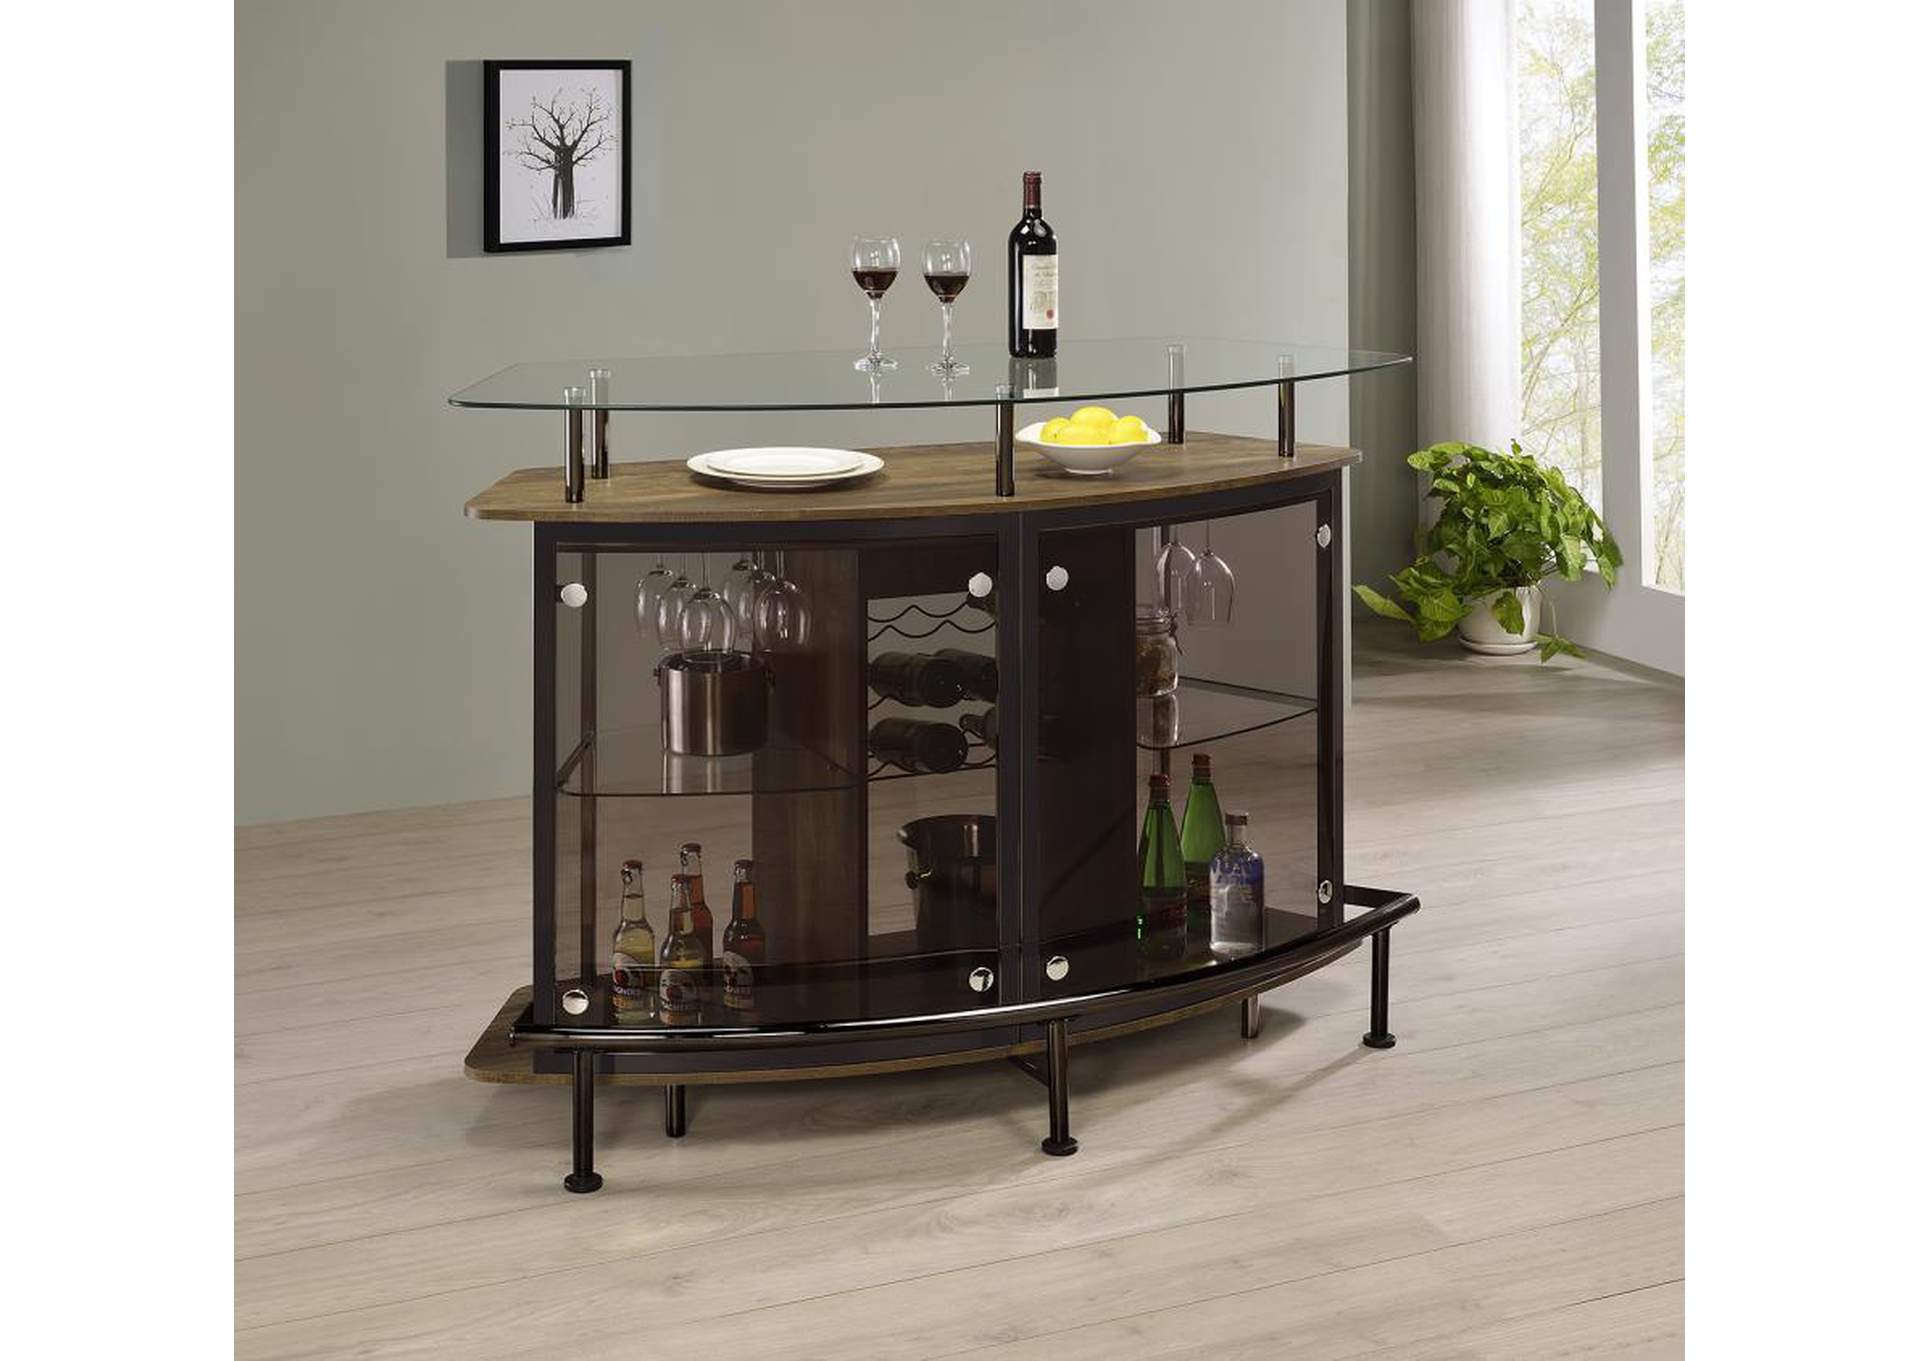 Gideon Crescent Shaped Glass Top Bar Unit With Drawer,Coaster Furniture